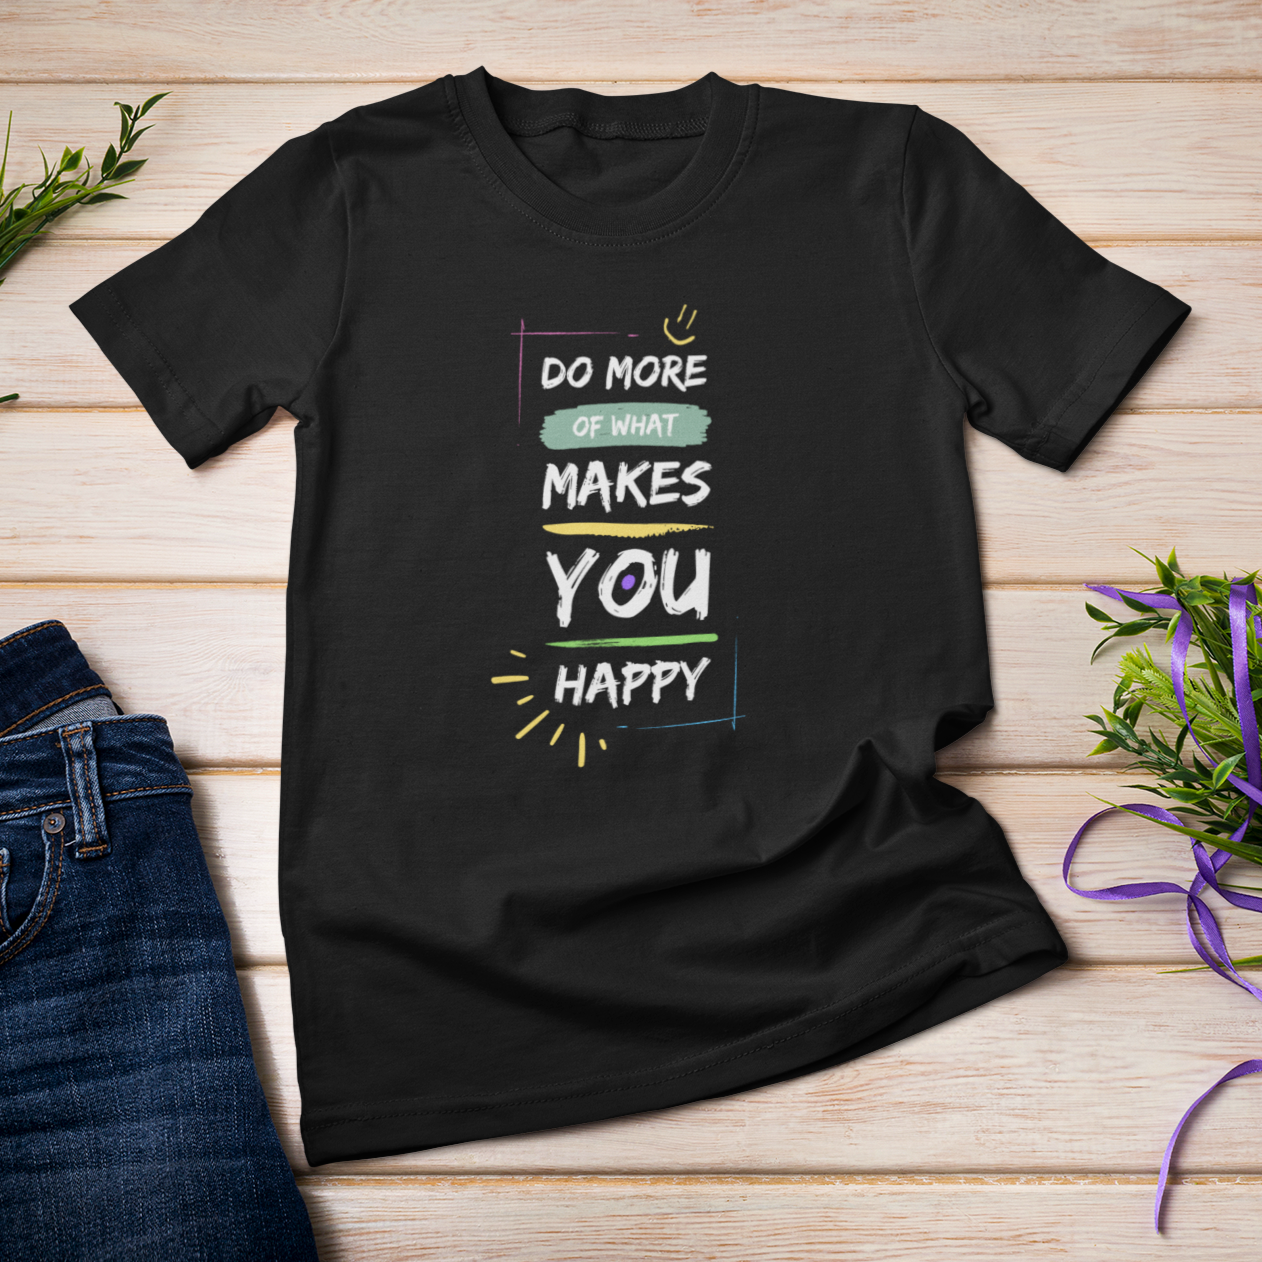 Story of Awakening Lifestyle Community Spirituality Relationships Love Light Meditation Oneness Earth Balance Healing Shop Store Charity Tree Nature Read Write T shirt Tops Tees Clothing Women Horoscope Do More Of What Makes You Happy Quote Sustainable Organic Cotton